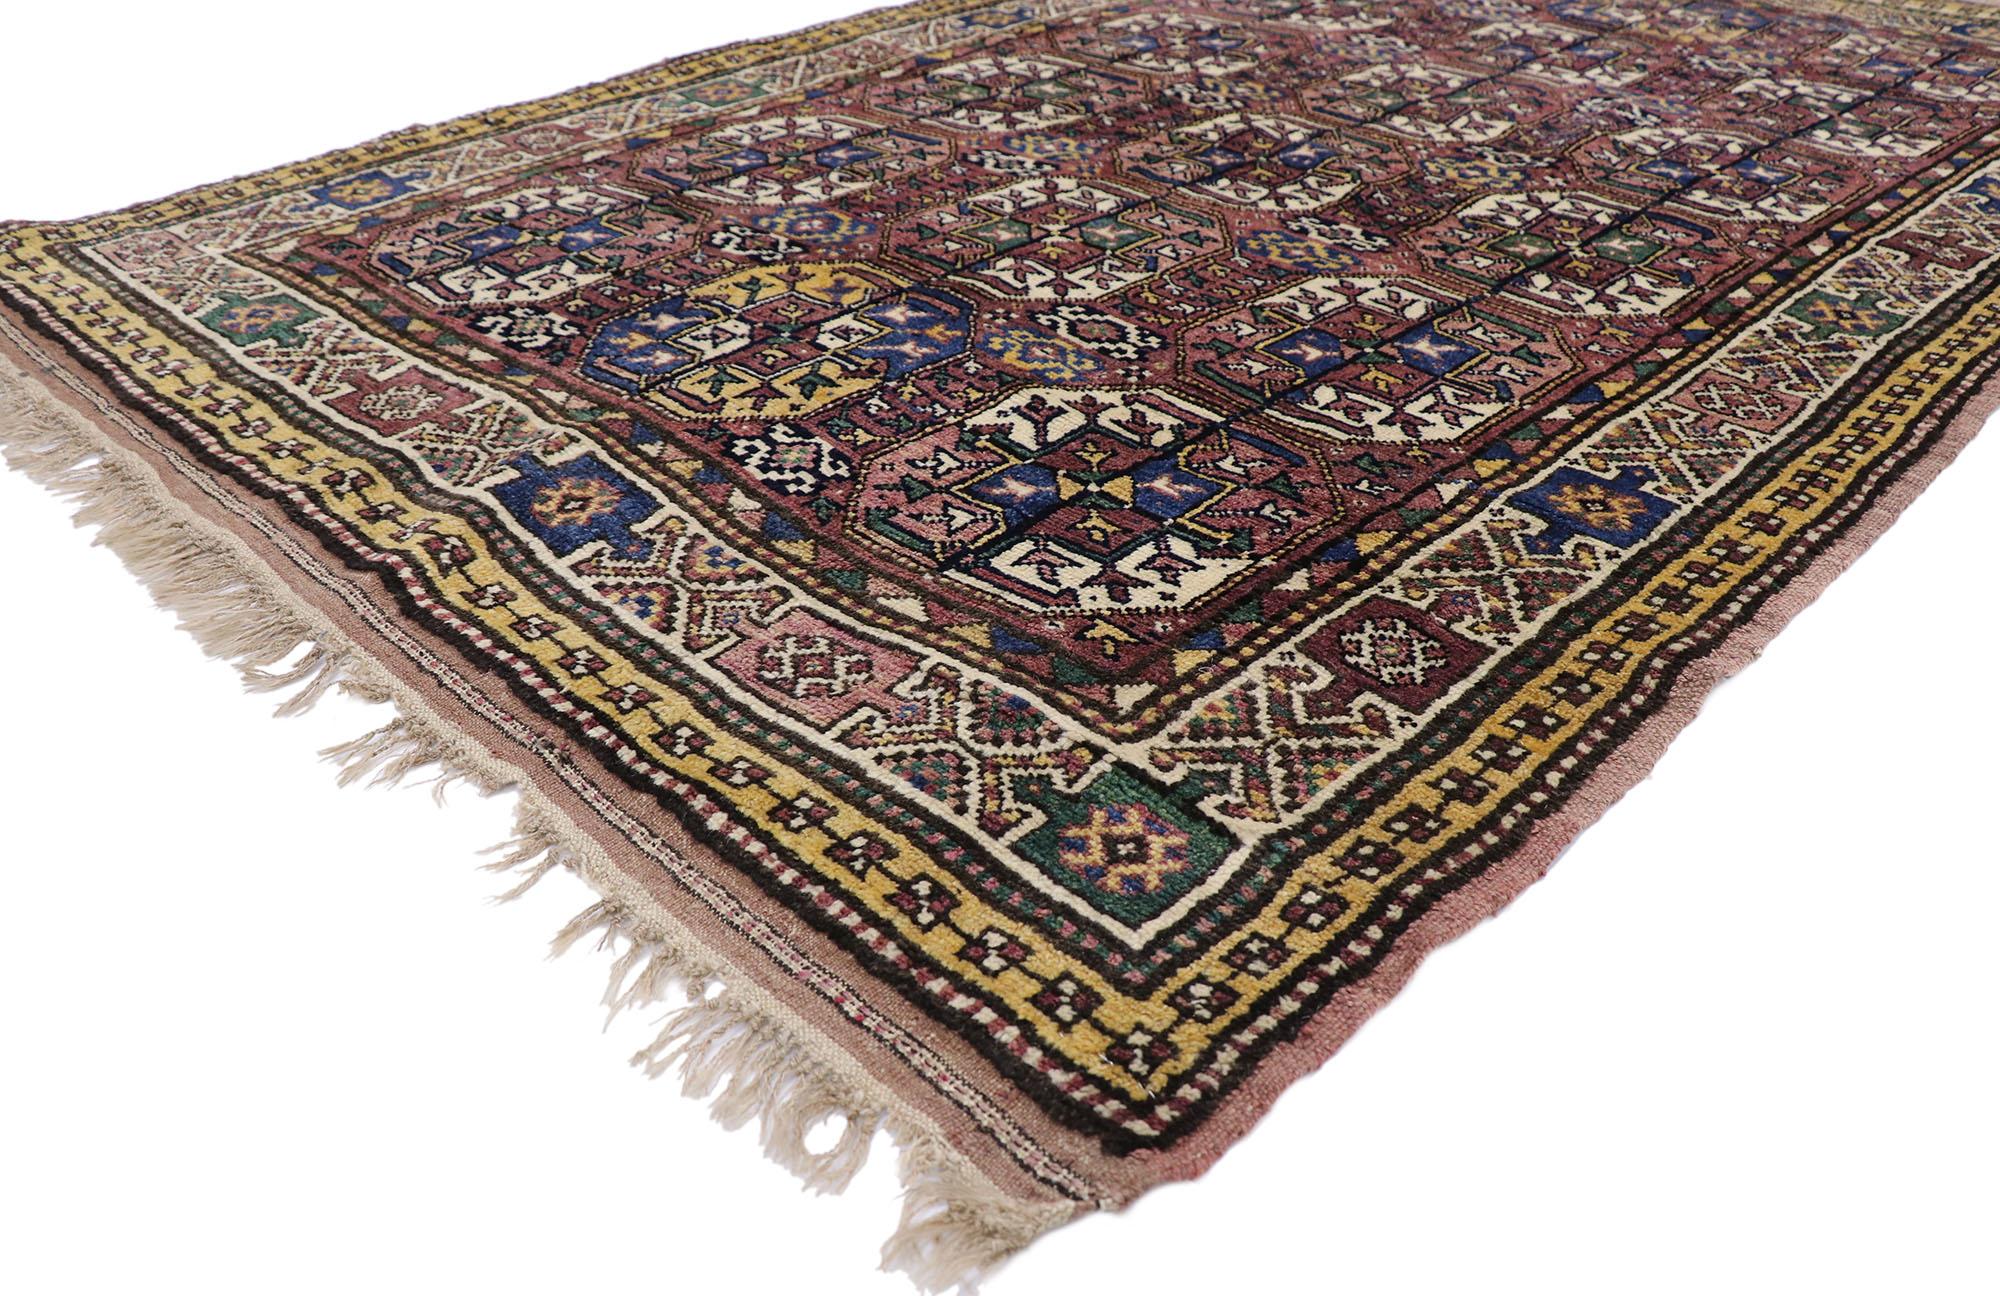 60892 antique Azerbaijan rug with Mid-Century Modern Tribal style 05'01 x 08'01. With its warm hues and rugged beauty, this hand-knotted wool antique Azerbaijan rug beautifully embodies a Mid-Century Modern tribal style. The abrashed purple hued